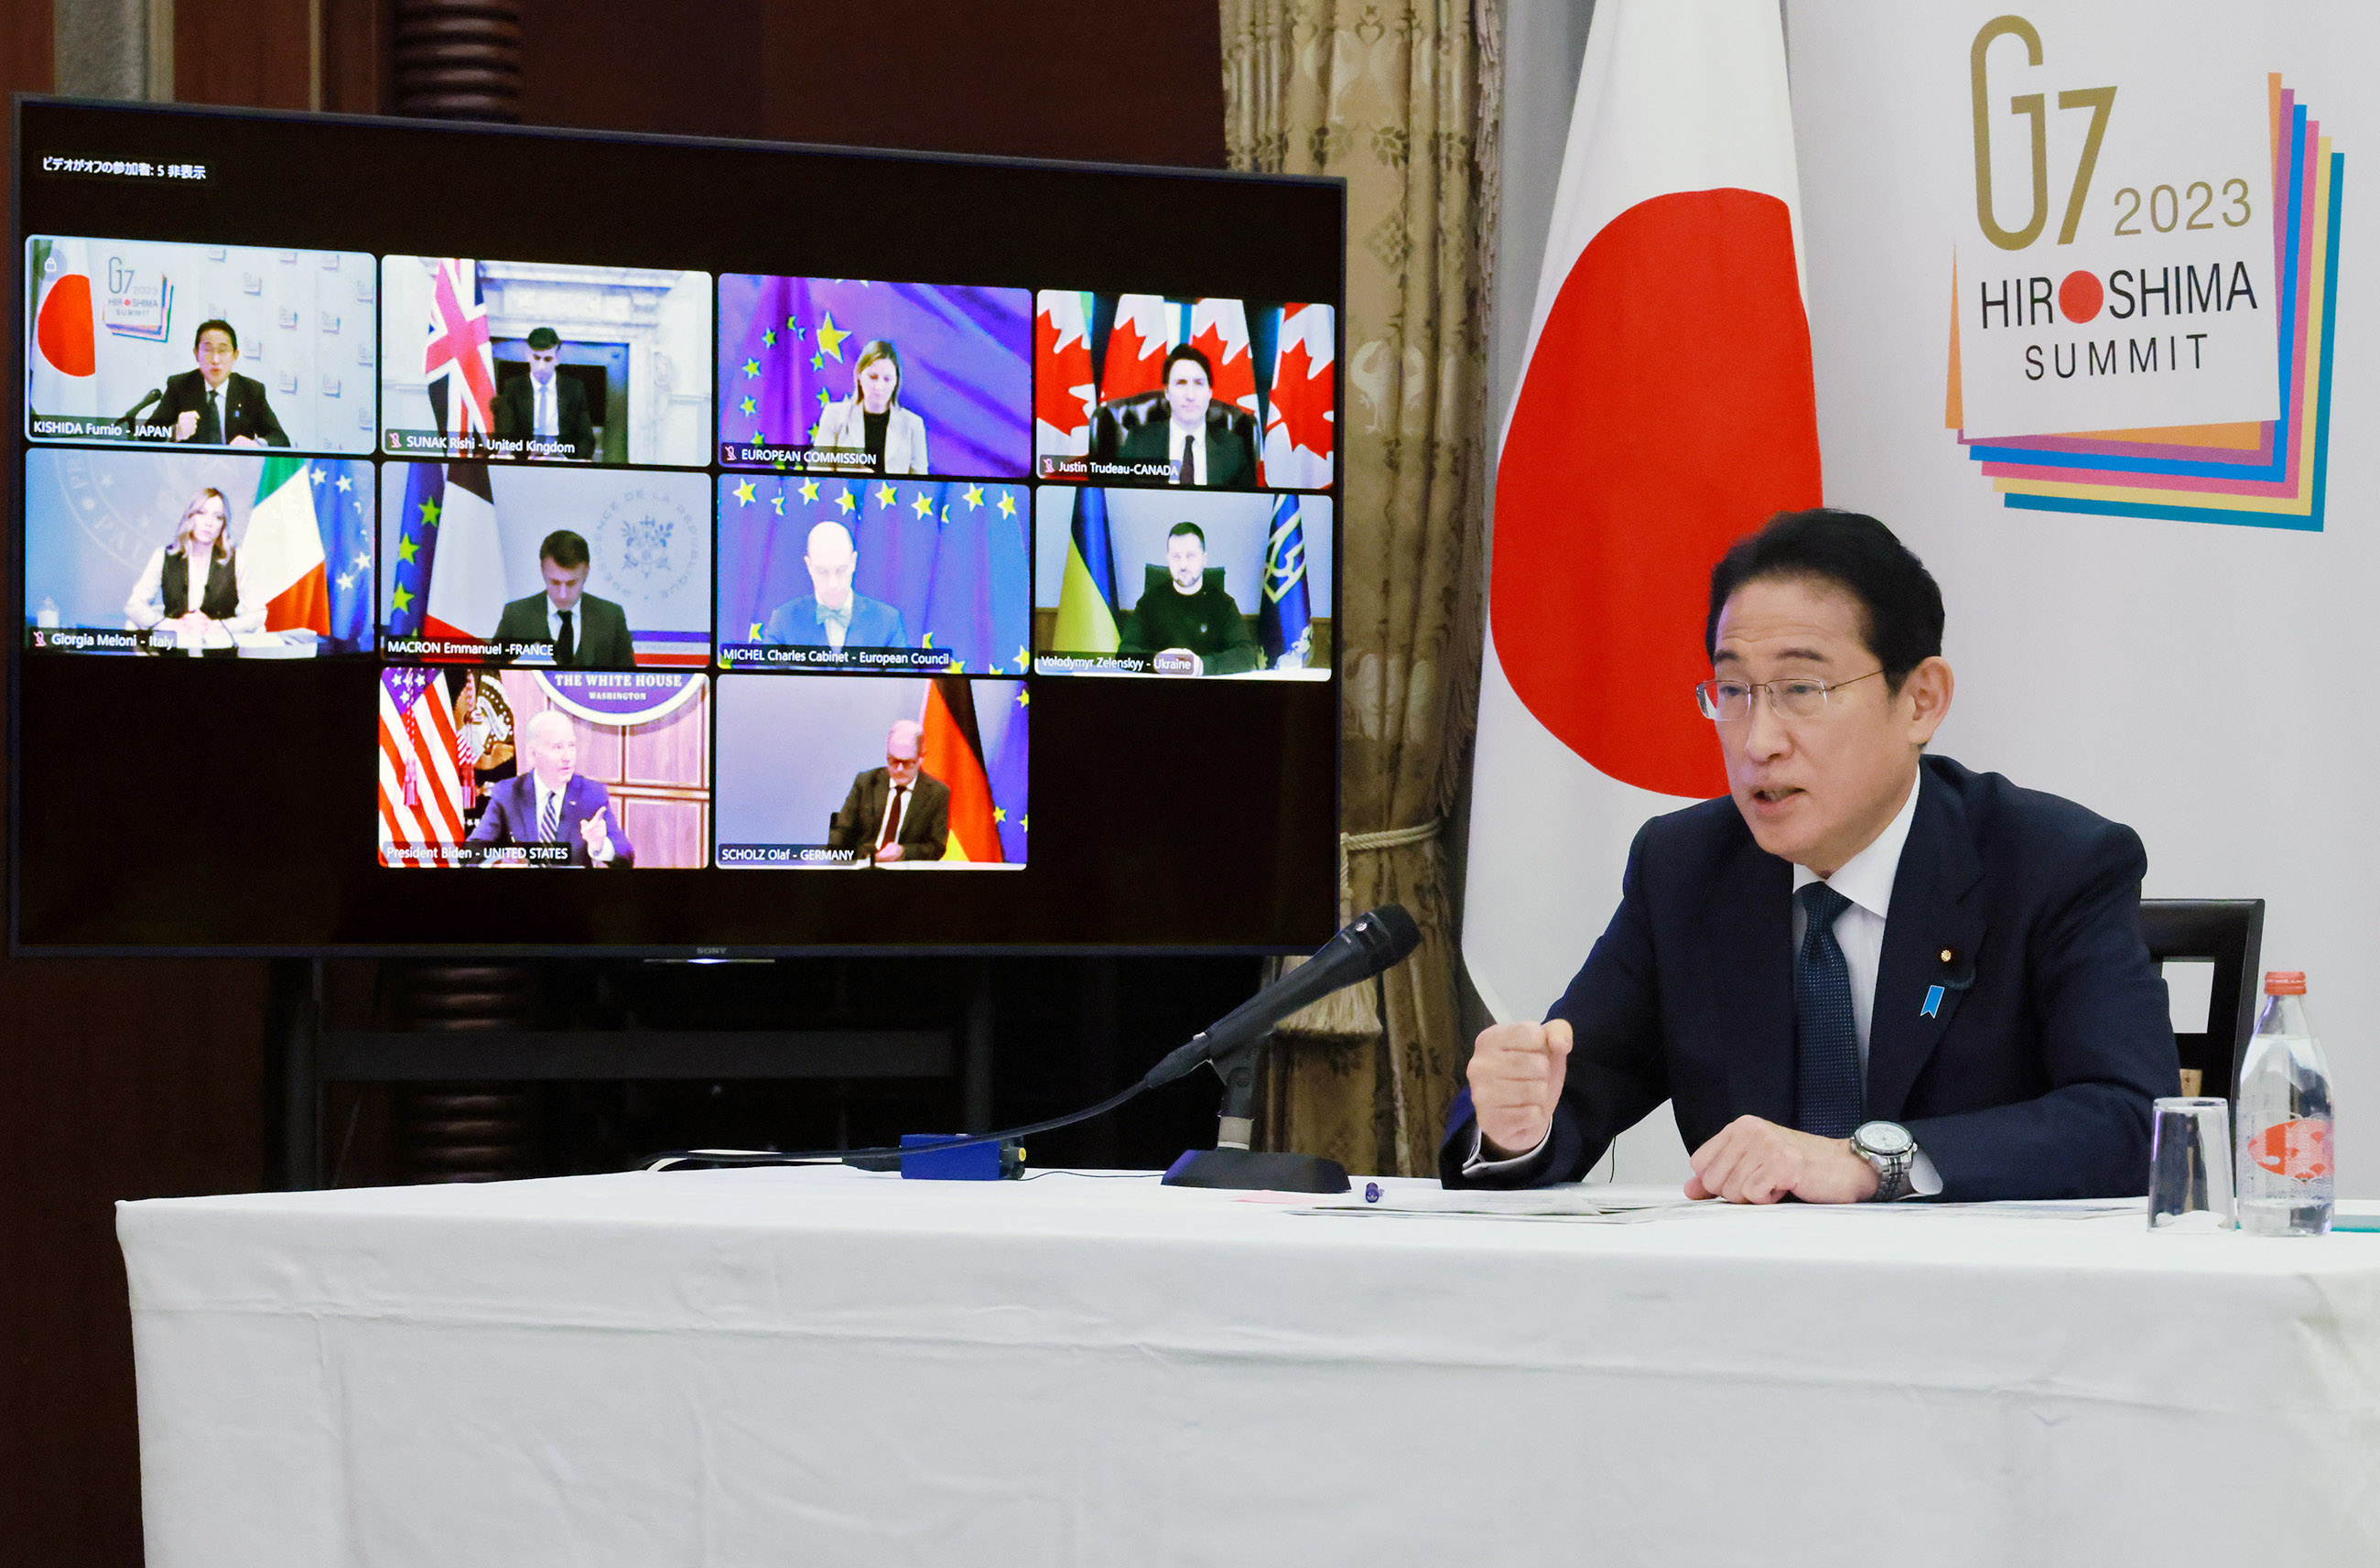 G7 Leaders’ Video Conference